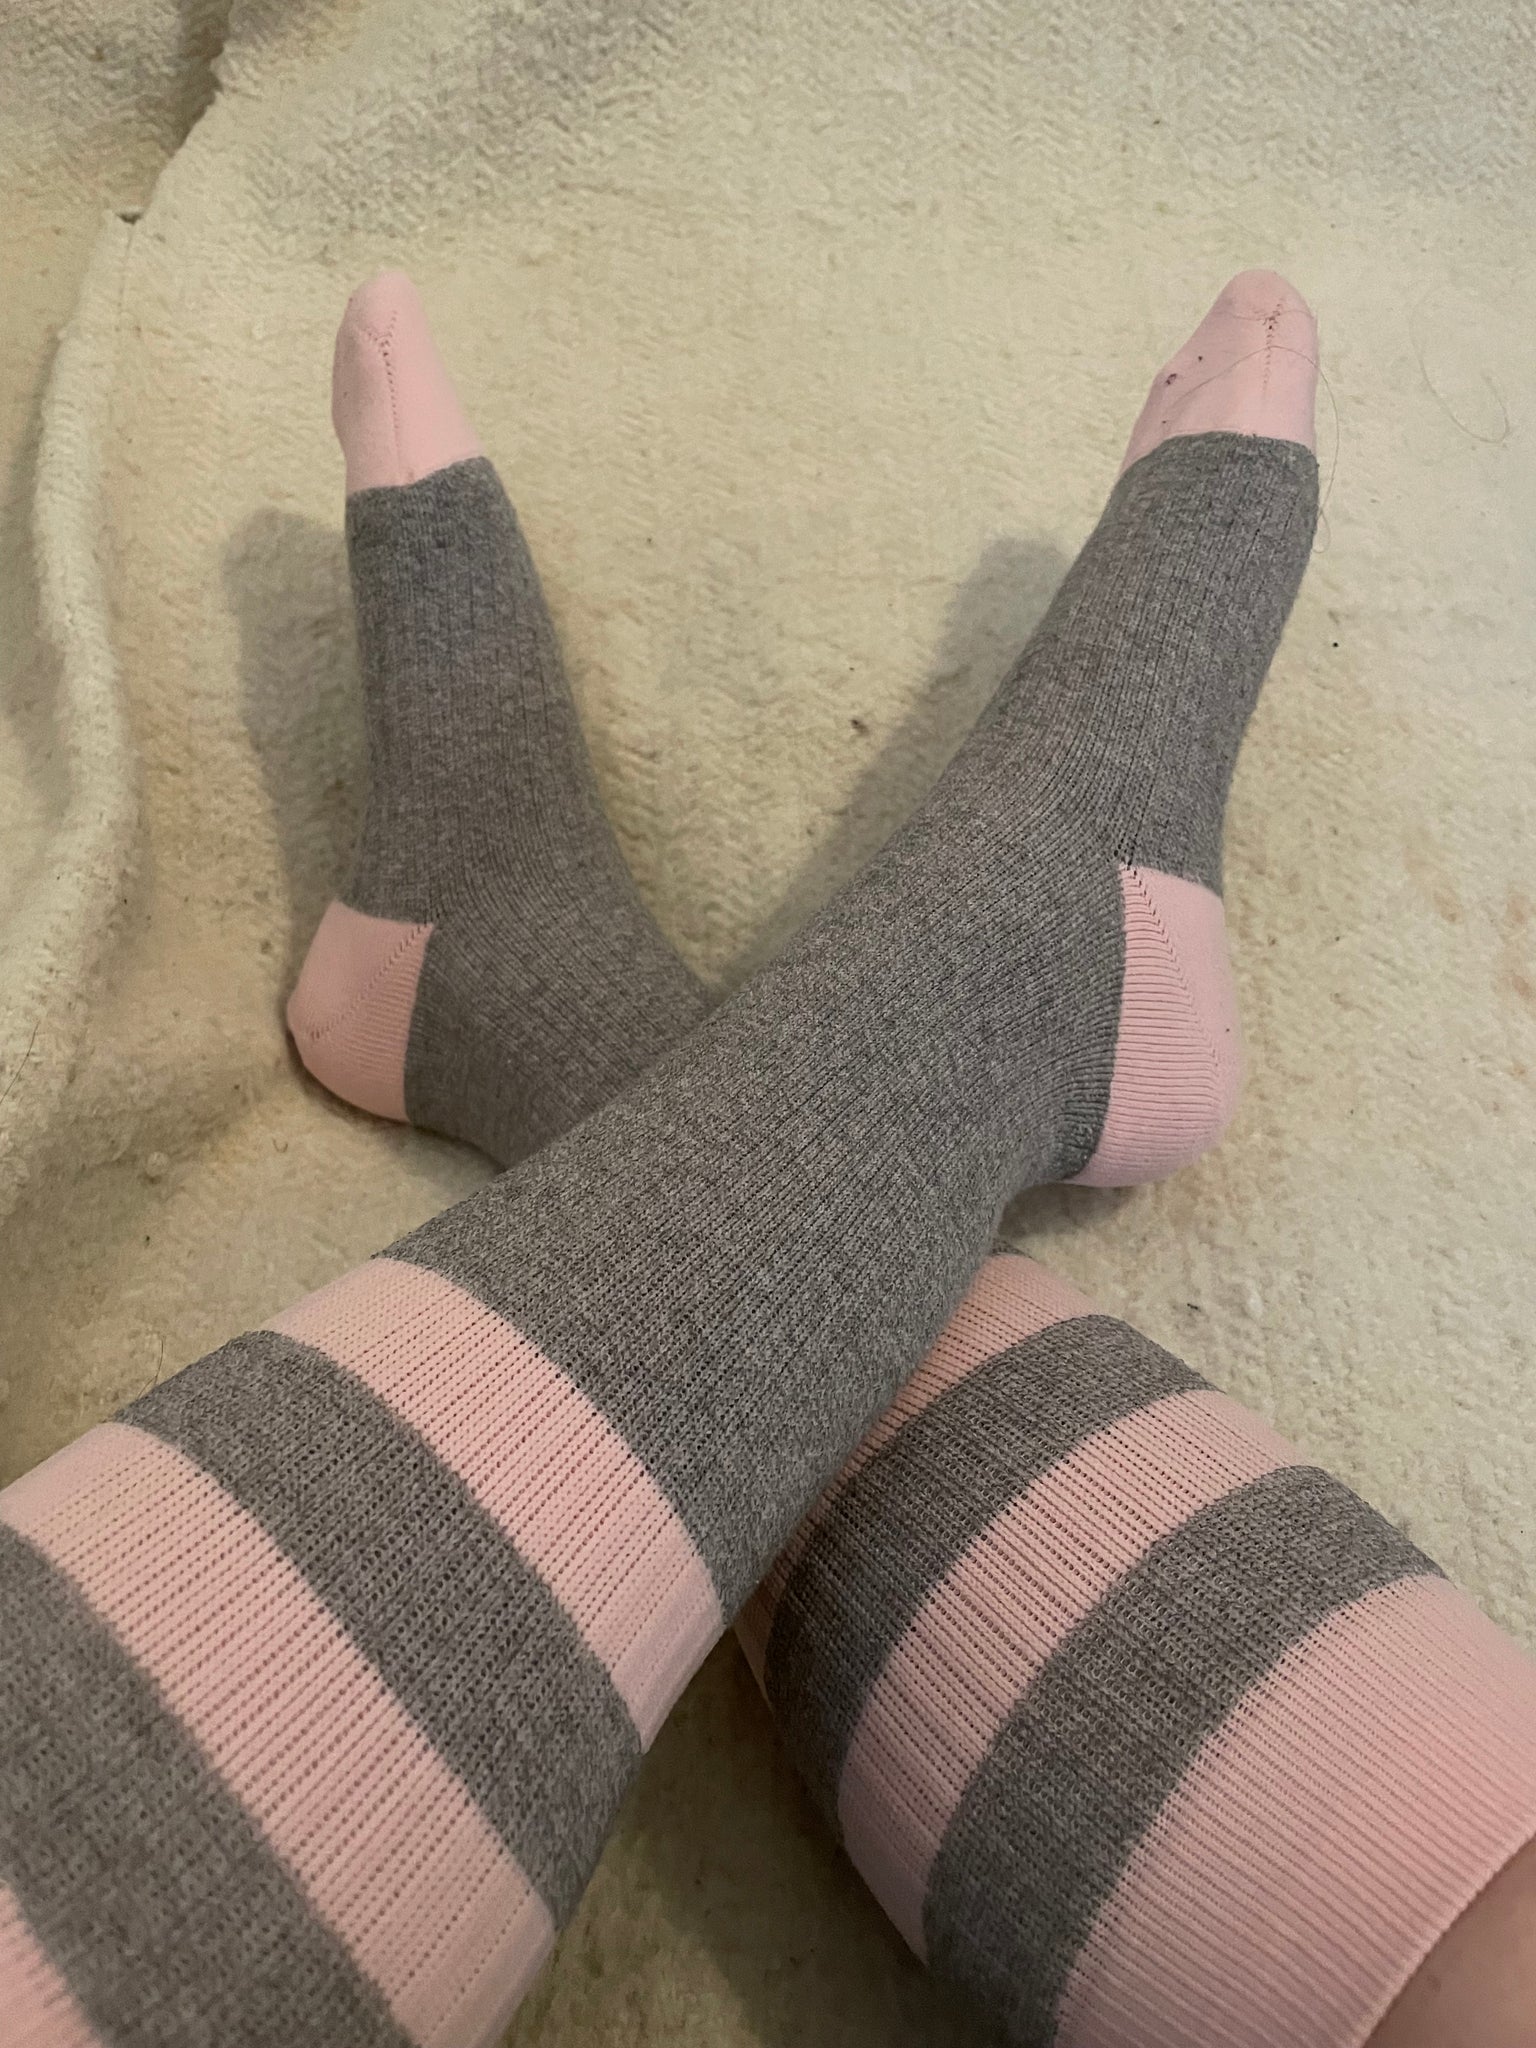 Midwife recommended compression socks 